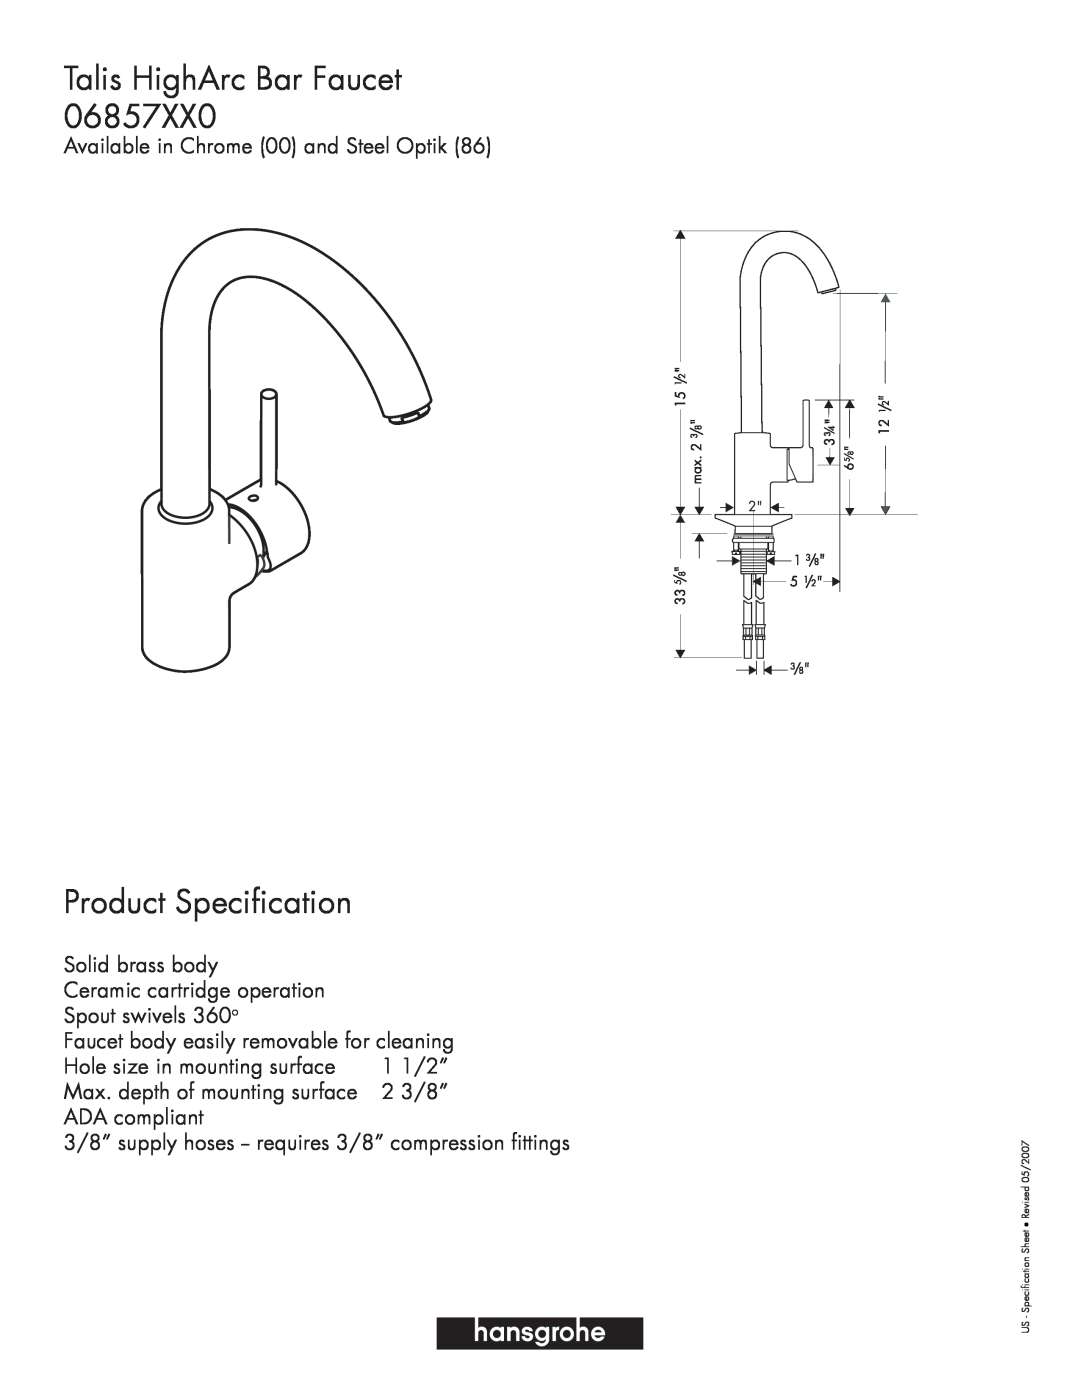 Axor 06857XX0 specifications Talis HighArc Bar Faucet, Product Specification, Available in Chrome 00 and Steel Optik 